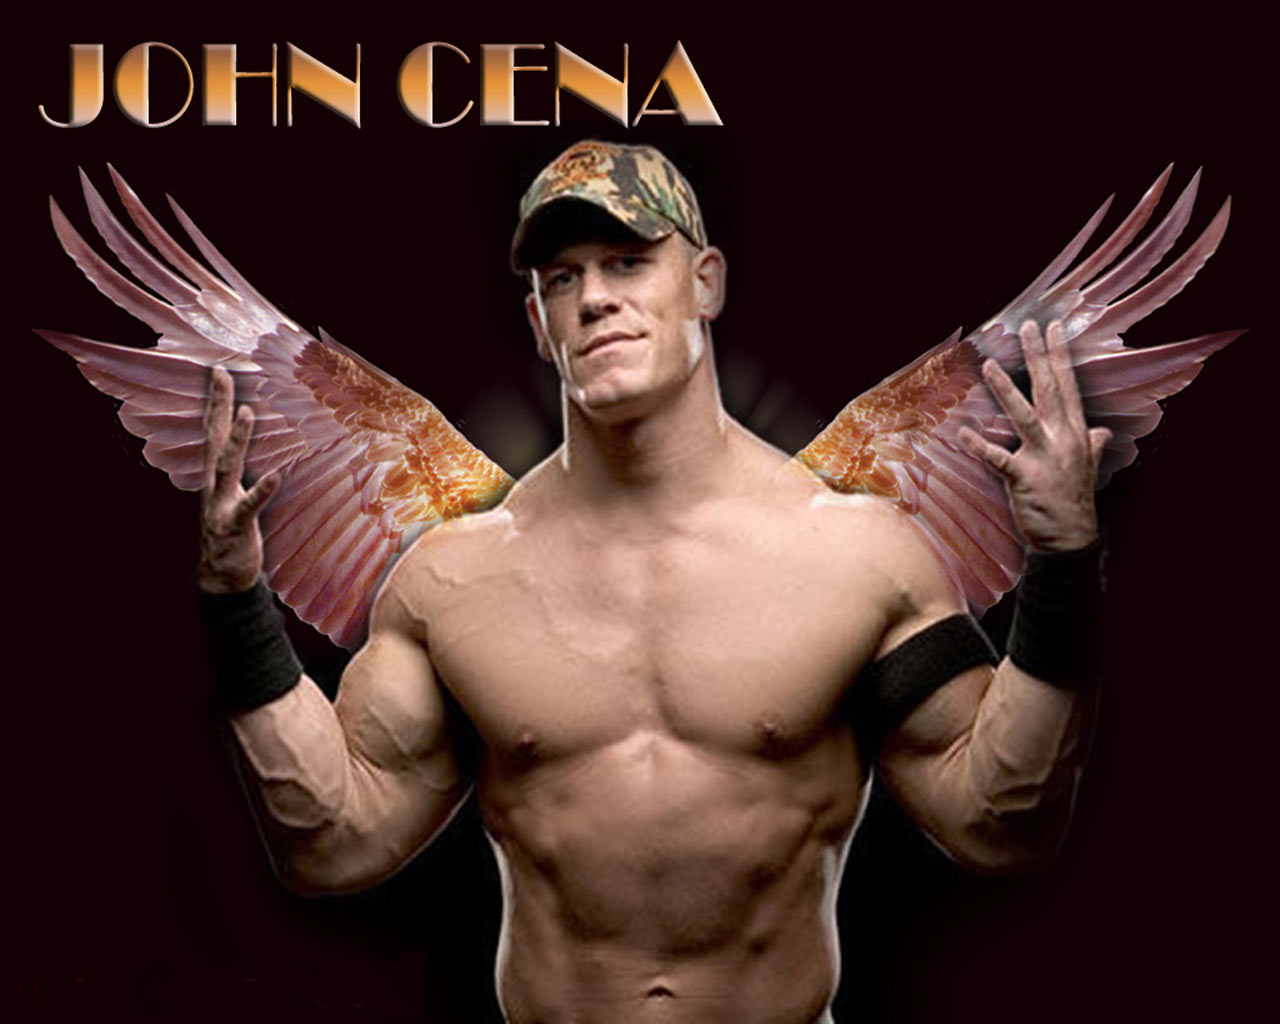 John Cena Wallpaper Which Is Under The Celebrity